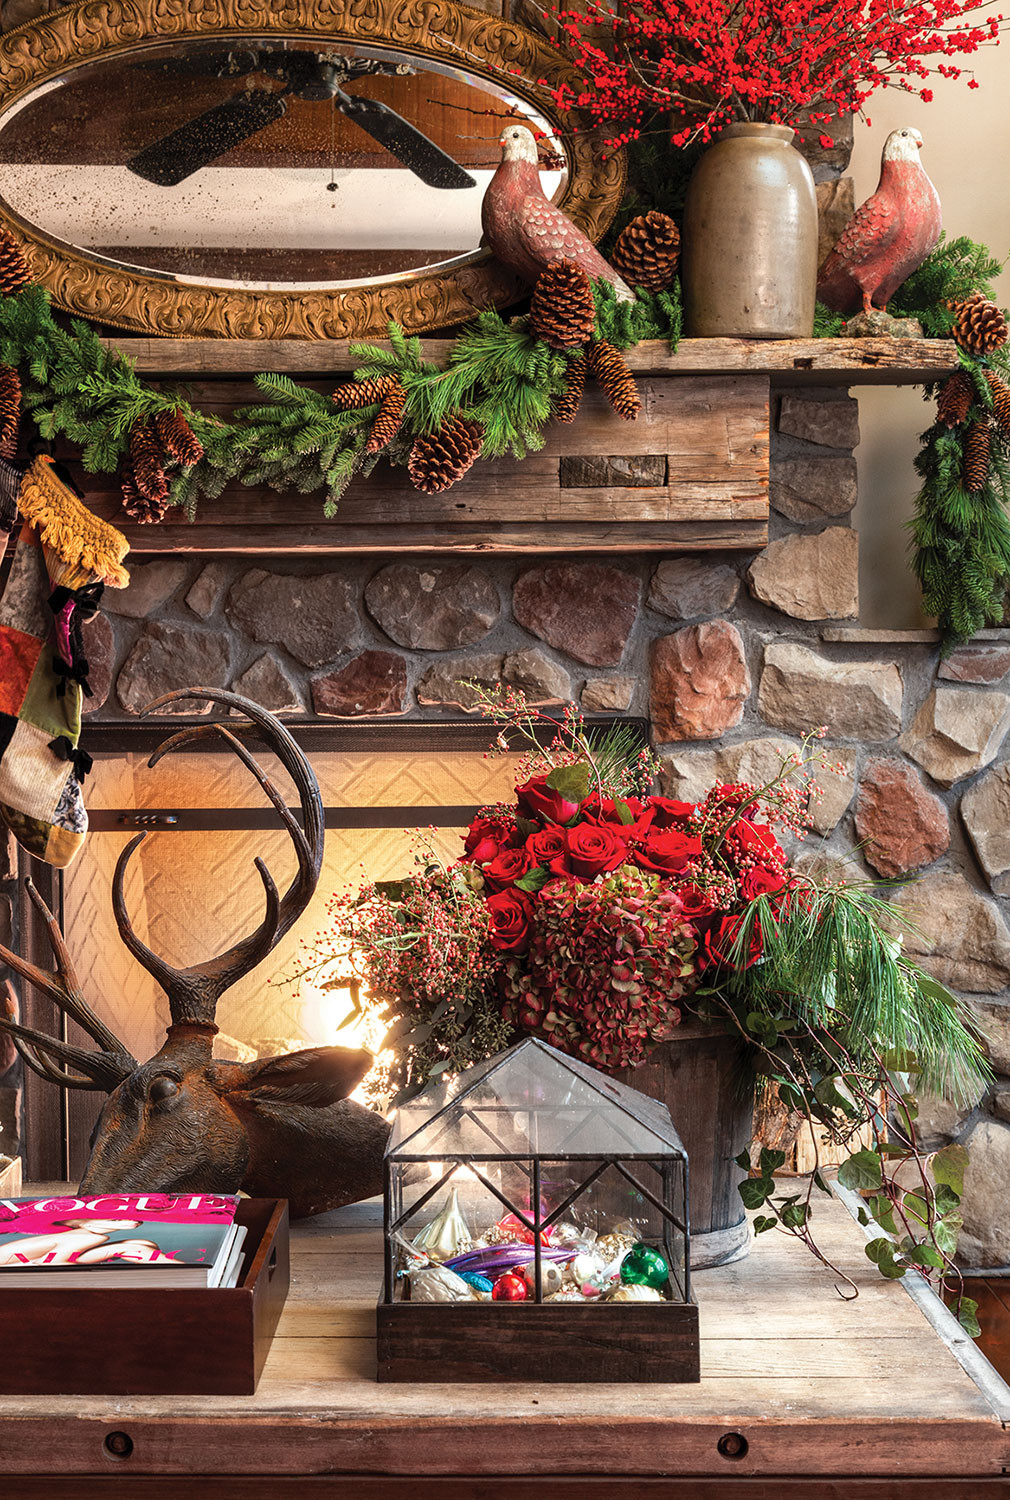 The scene includes an iron sculpture of a deer head with antlers, a leaded glass box holding vintage ornaments, and an red rose and evergreen floral arrangement on the coffee table. On the stone fireplace behind it, the rustic wood mantel is decorated with a mixed evergreen garland, two decorative partridges, and pottery vessel field with branches of red berries